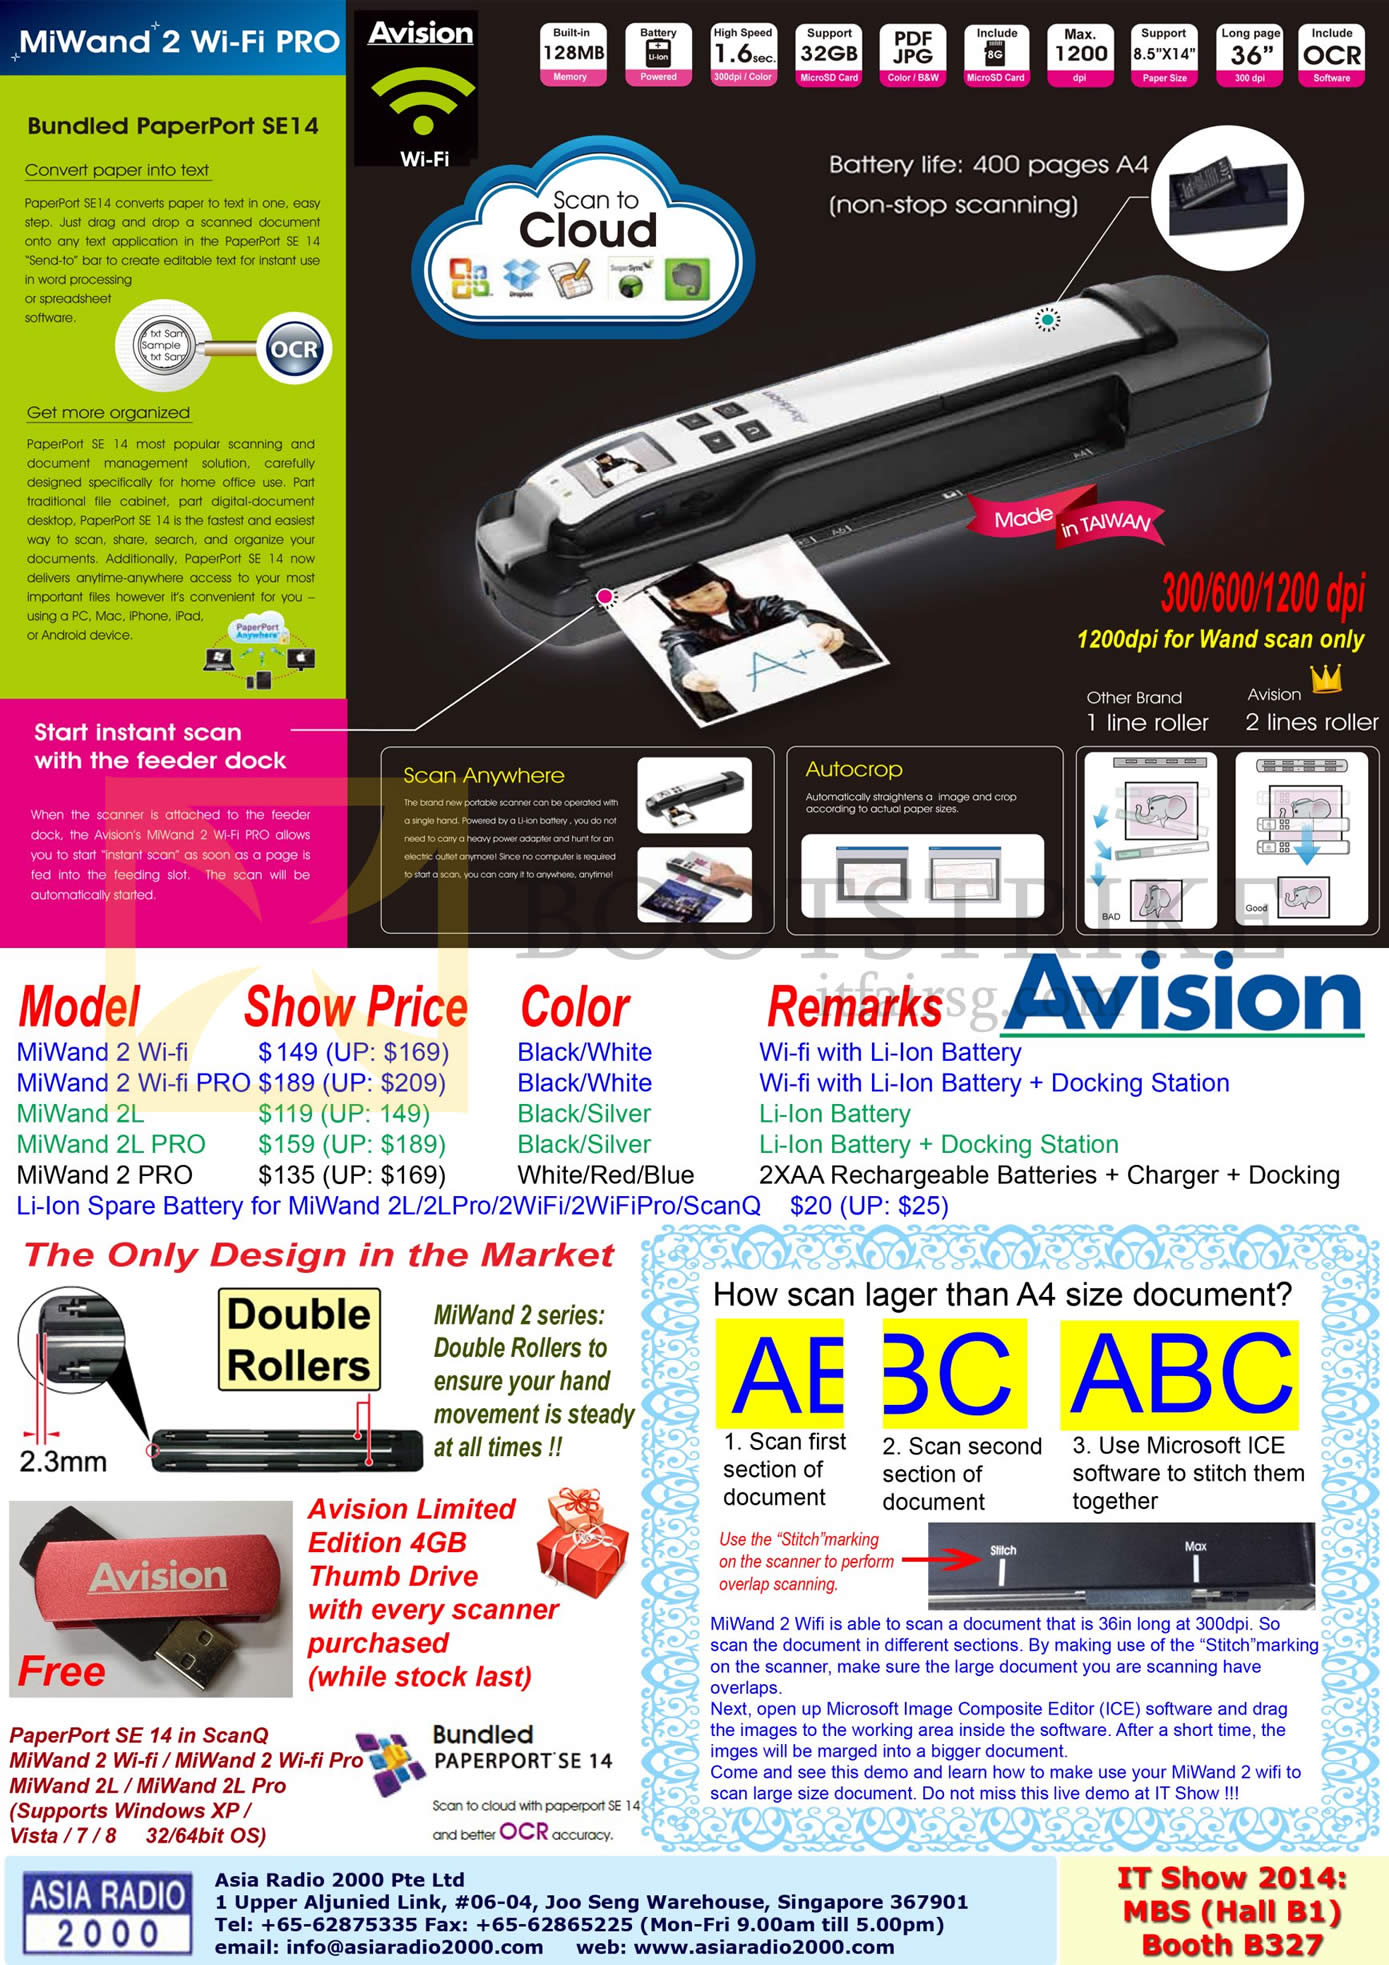 IT SHOW 2014 price list image brochure of Asia Radio Avision MiWand 2 Wi-Fi Pro Scanner, Pro, 2L Pro